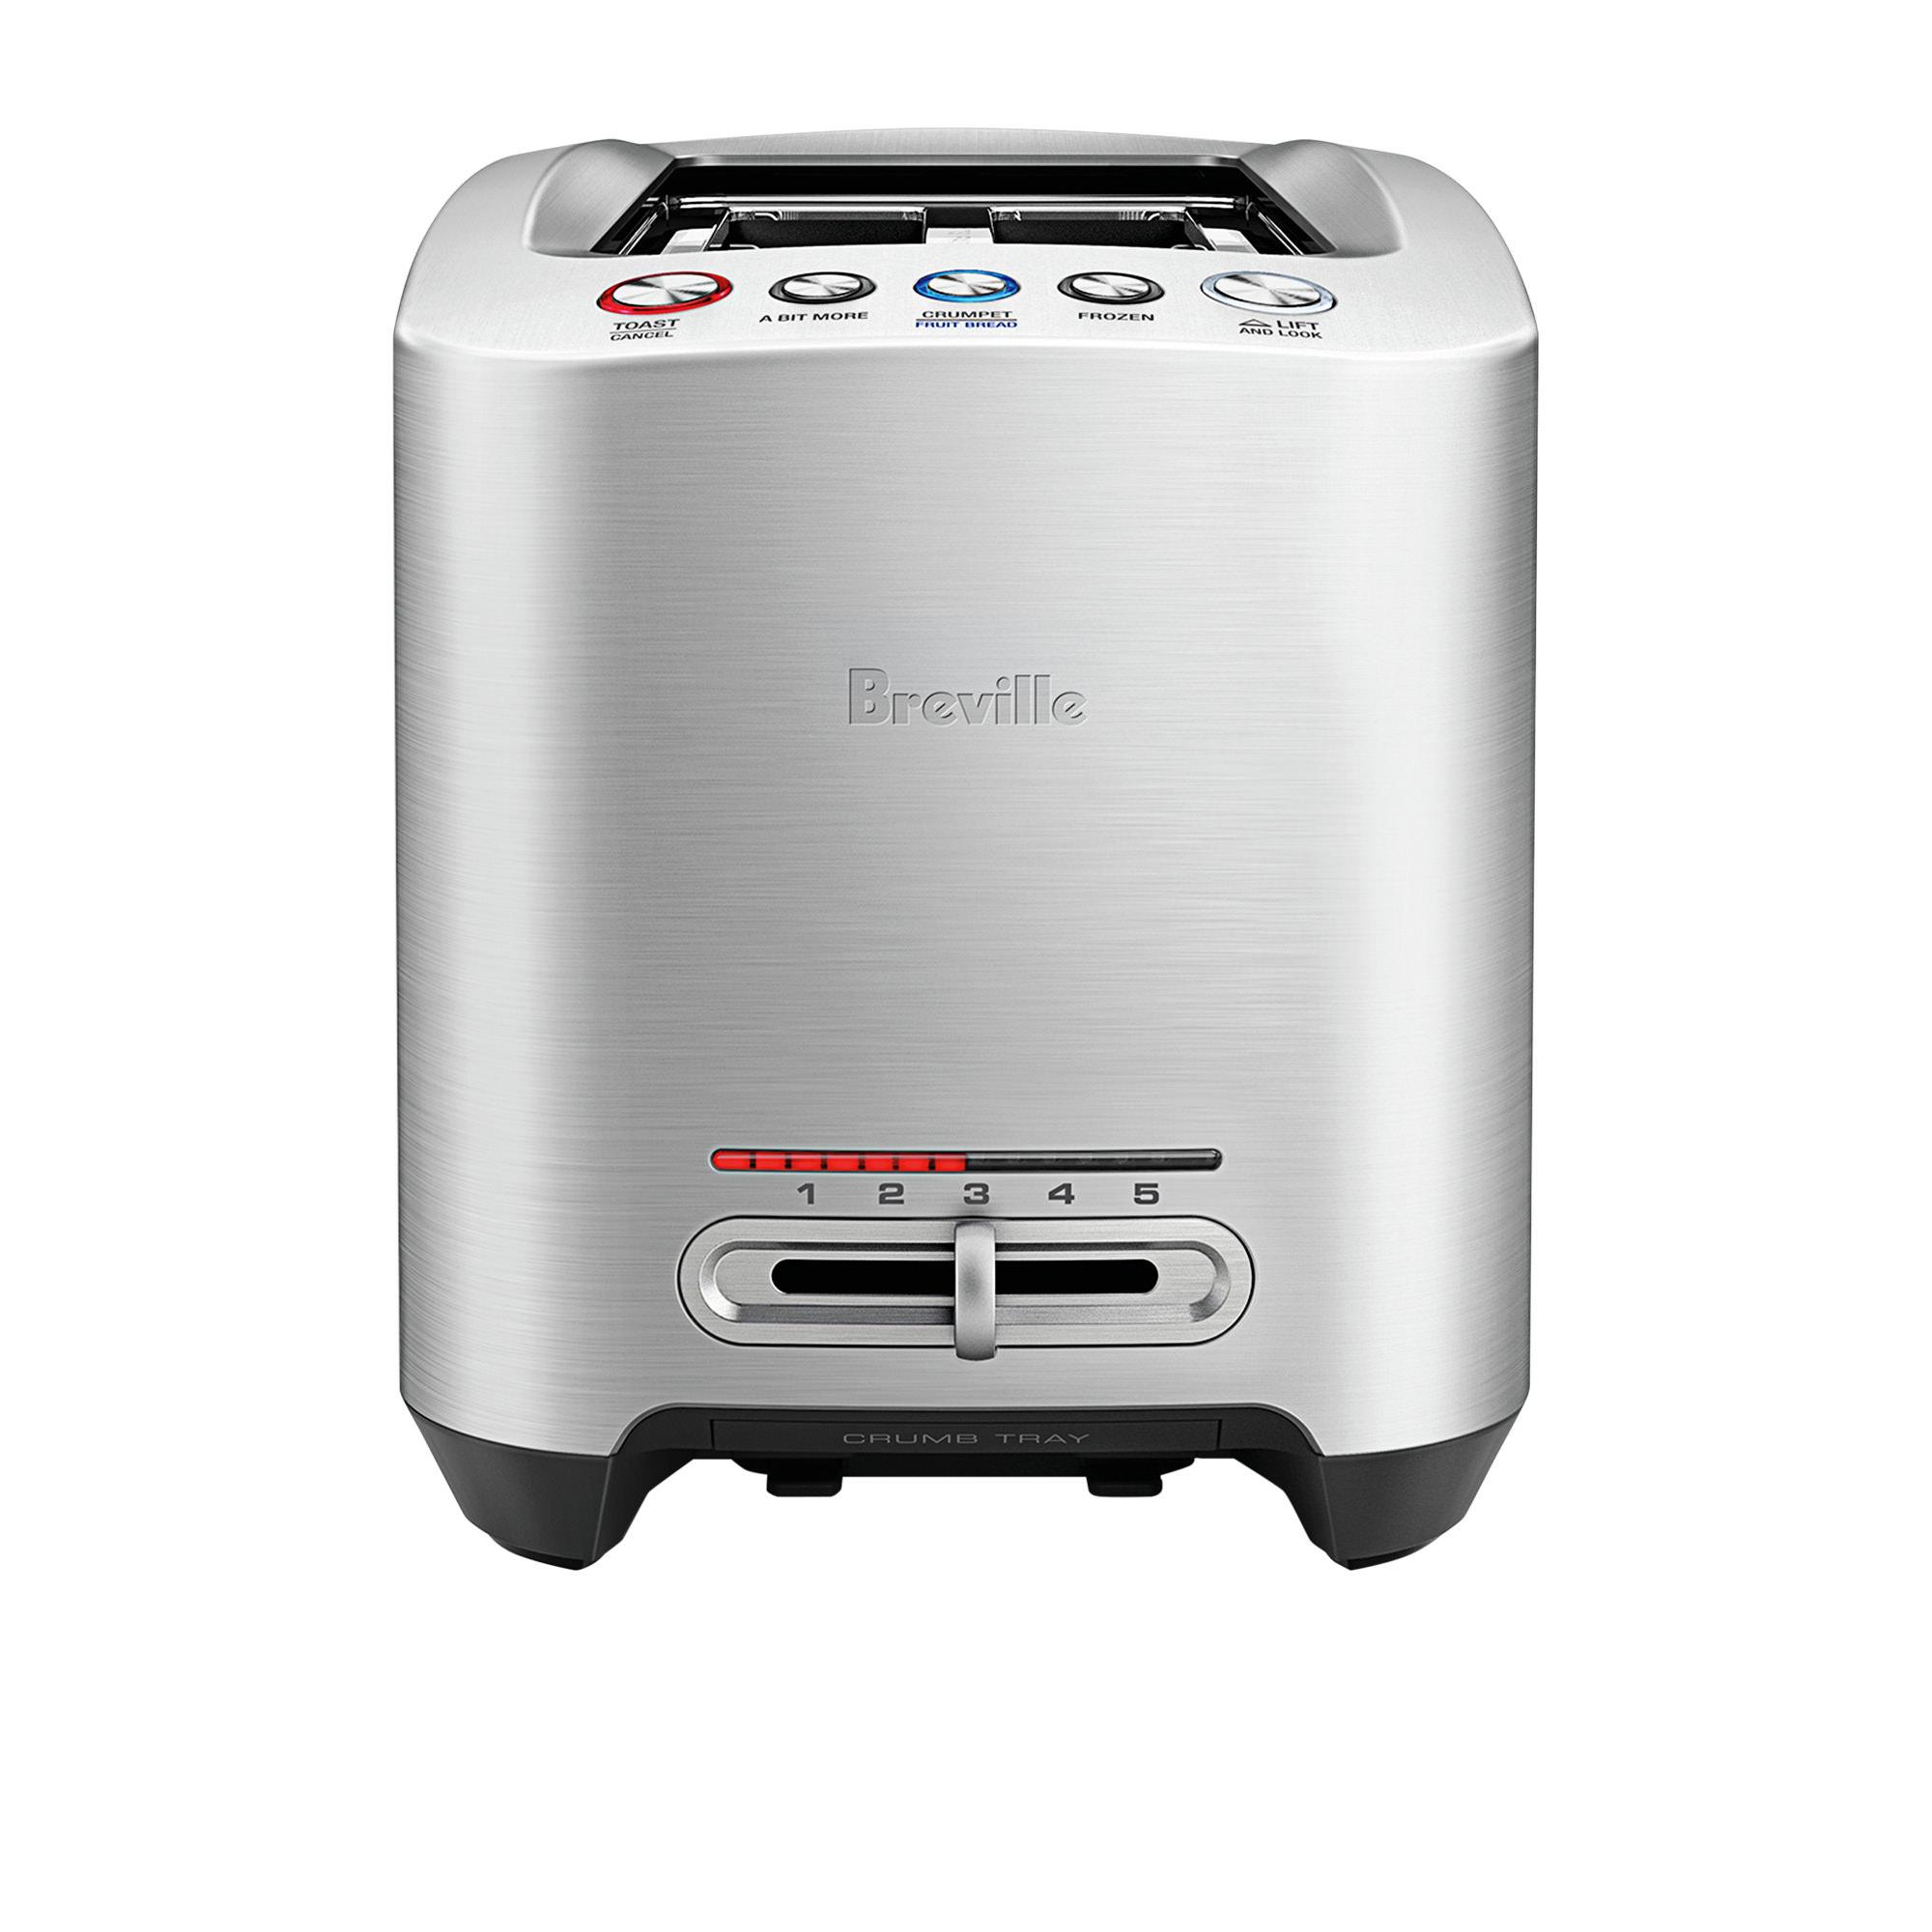 Breville The Smart 4 Slice Toaster with Fruit Bread Setting Image 3